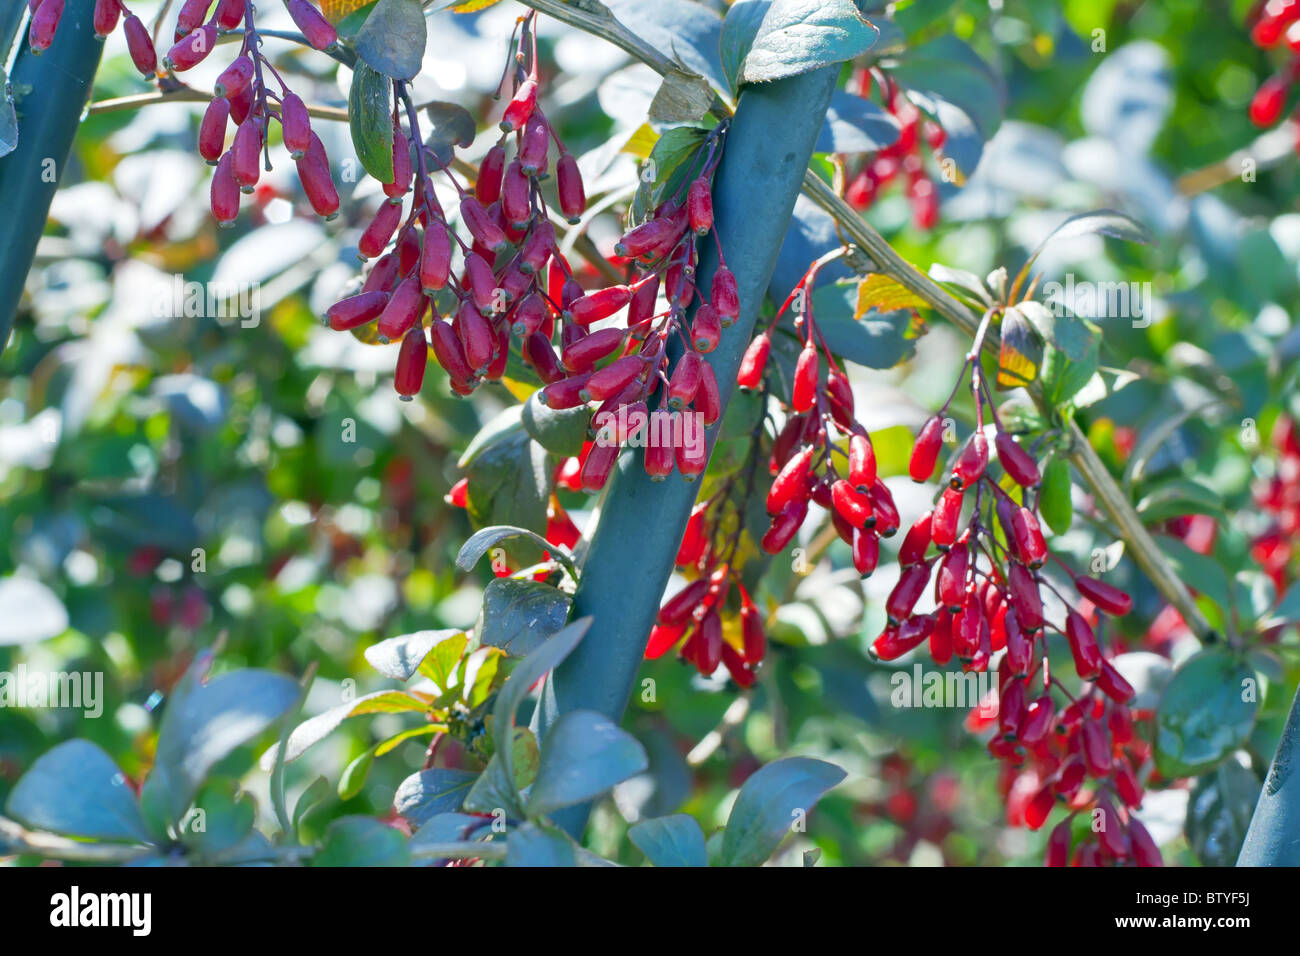 Ripe red berries of a barberry Stock Photo